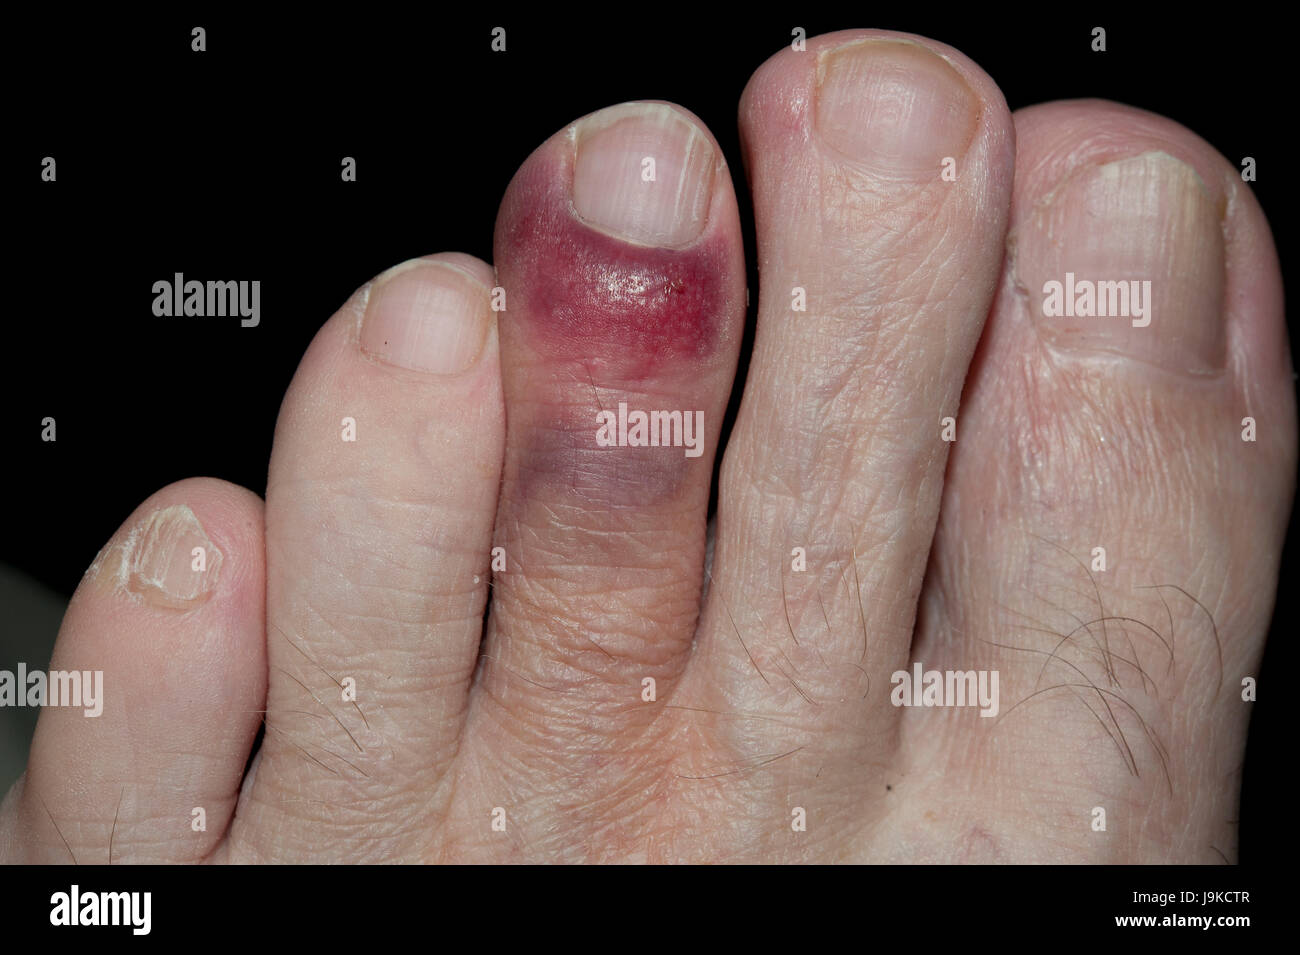 Broken toe: Treatments, symptoms, pictures, and healing time